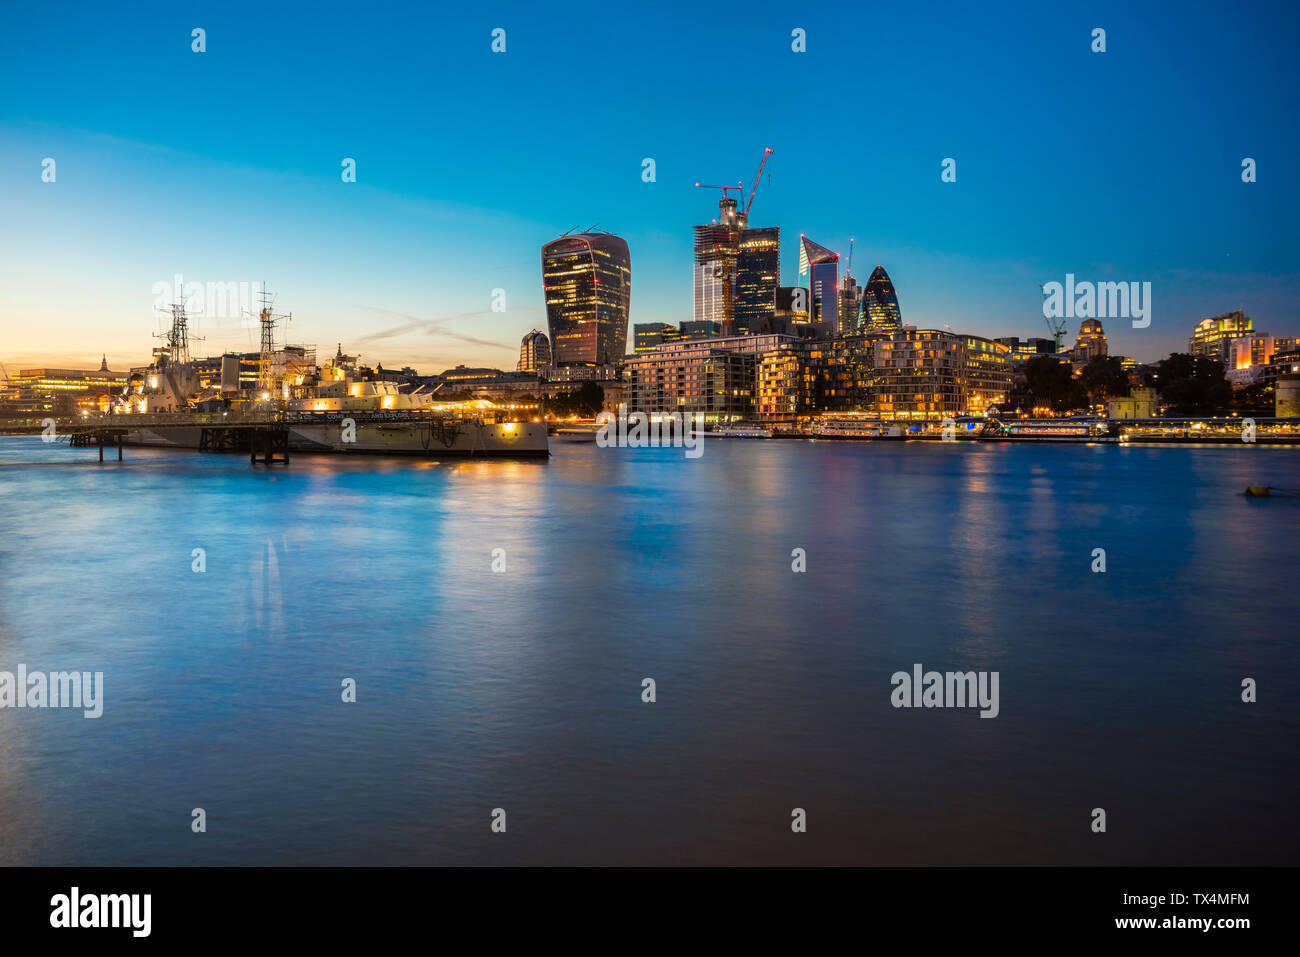 UK, London, Skyline at night with Hms Belfast in the foreground Stock Photo